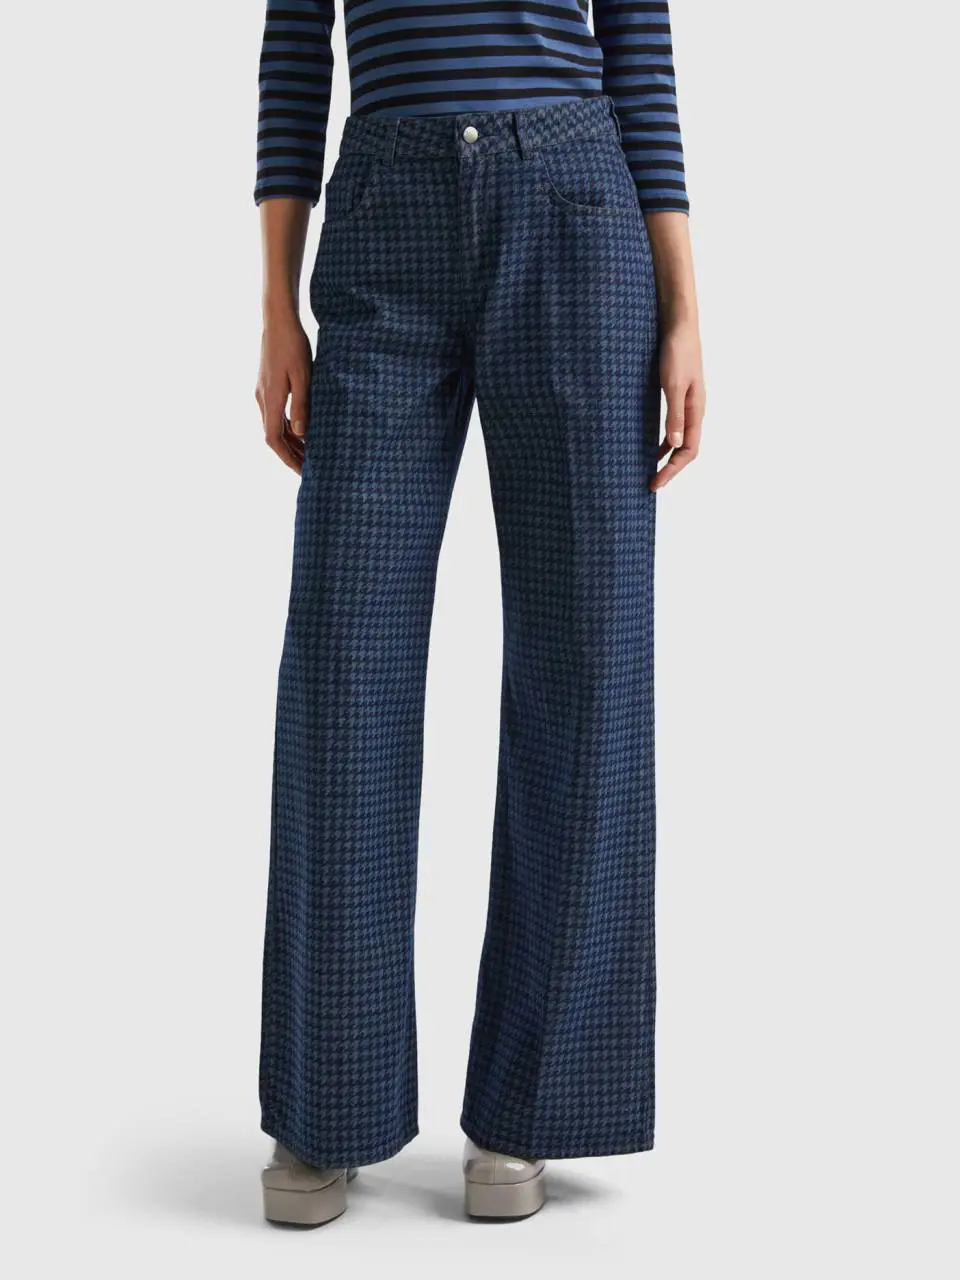 Benetton houndstooth jeans with wide leg. 1